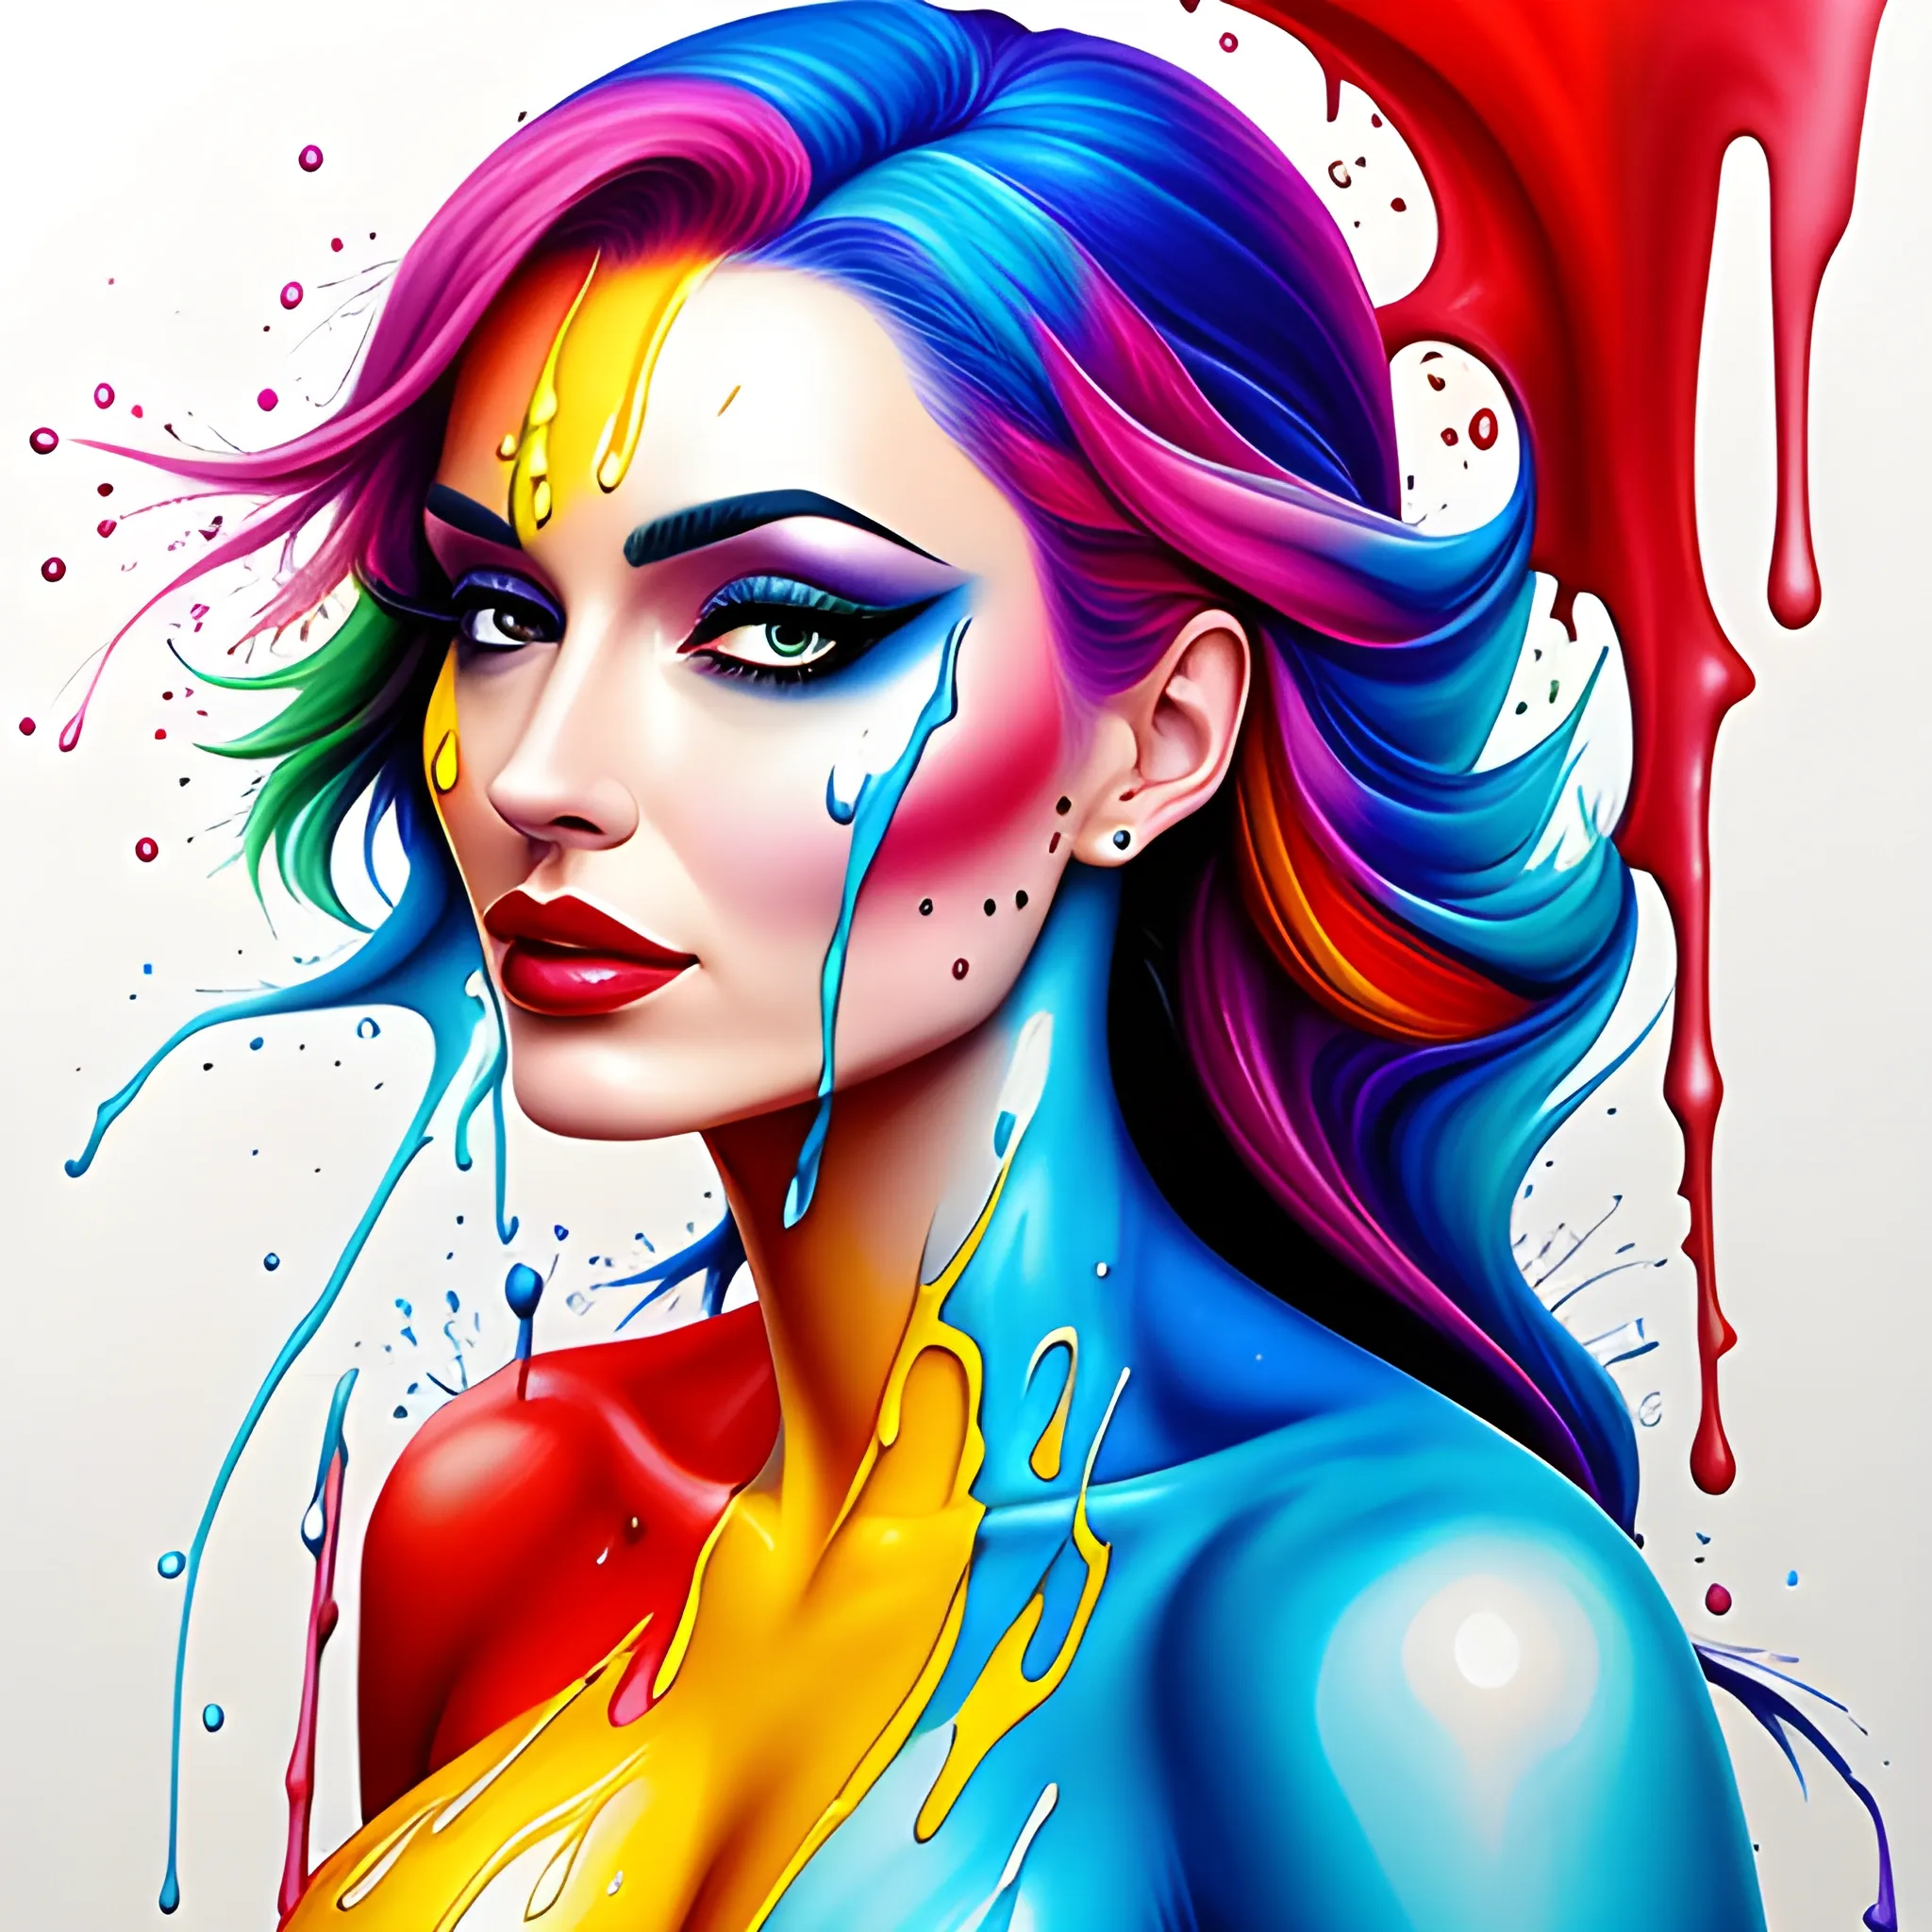 Fluid painting art girl, colorful, realistic, high quality